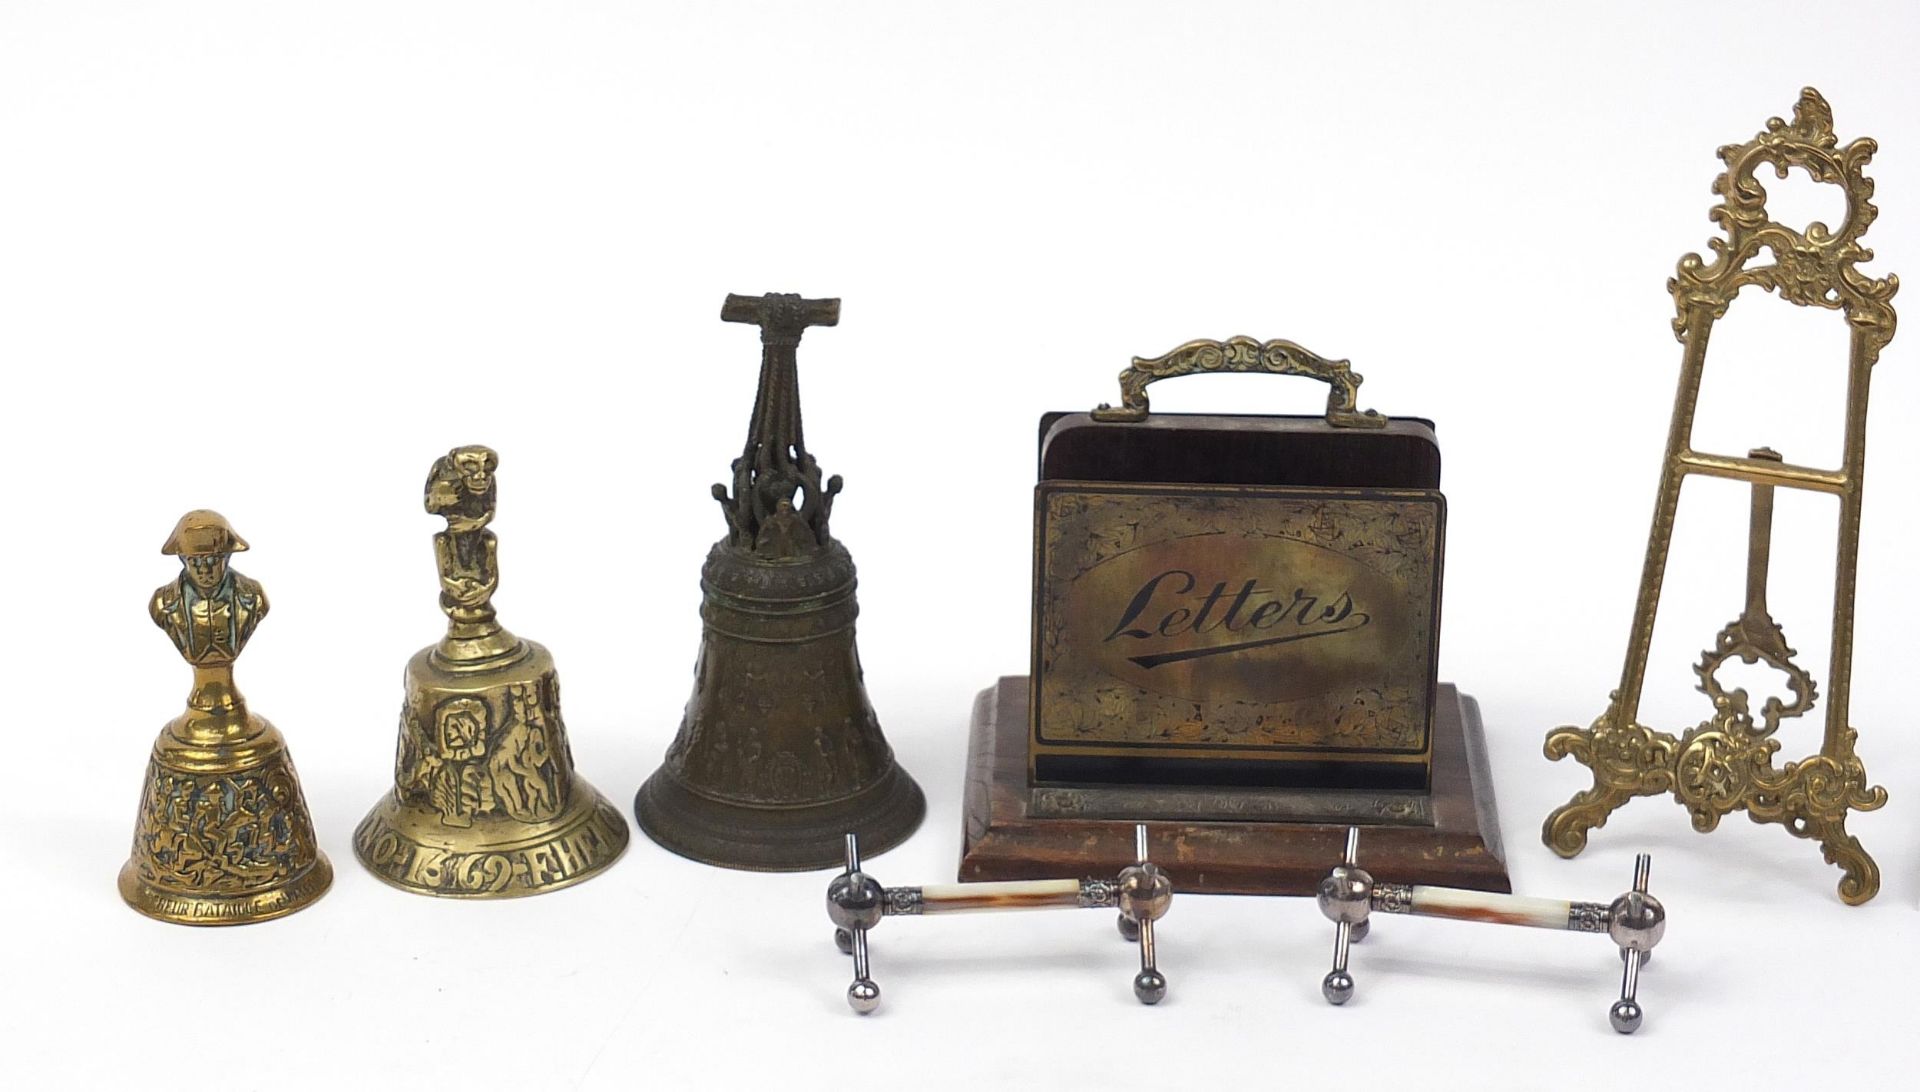 19th century and later metalware including three classical bronzed bells, one with Napoleon - Image 2 of 4